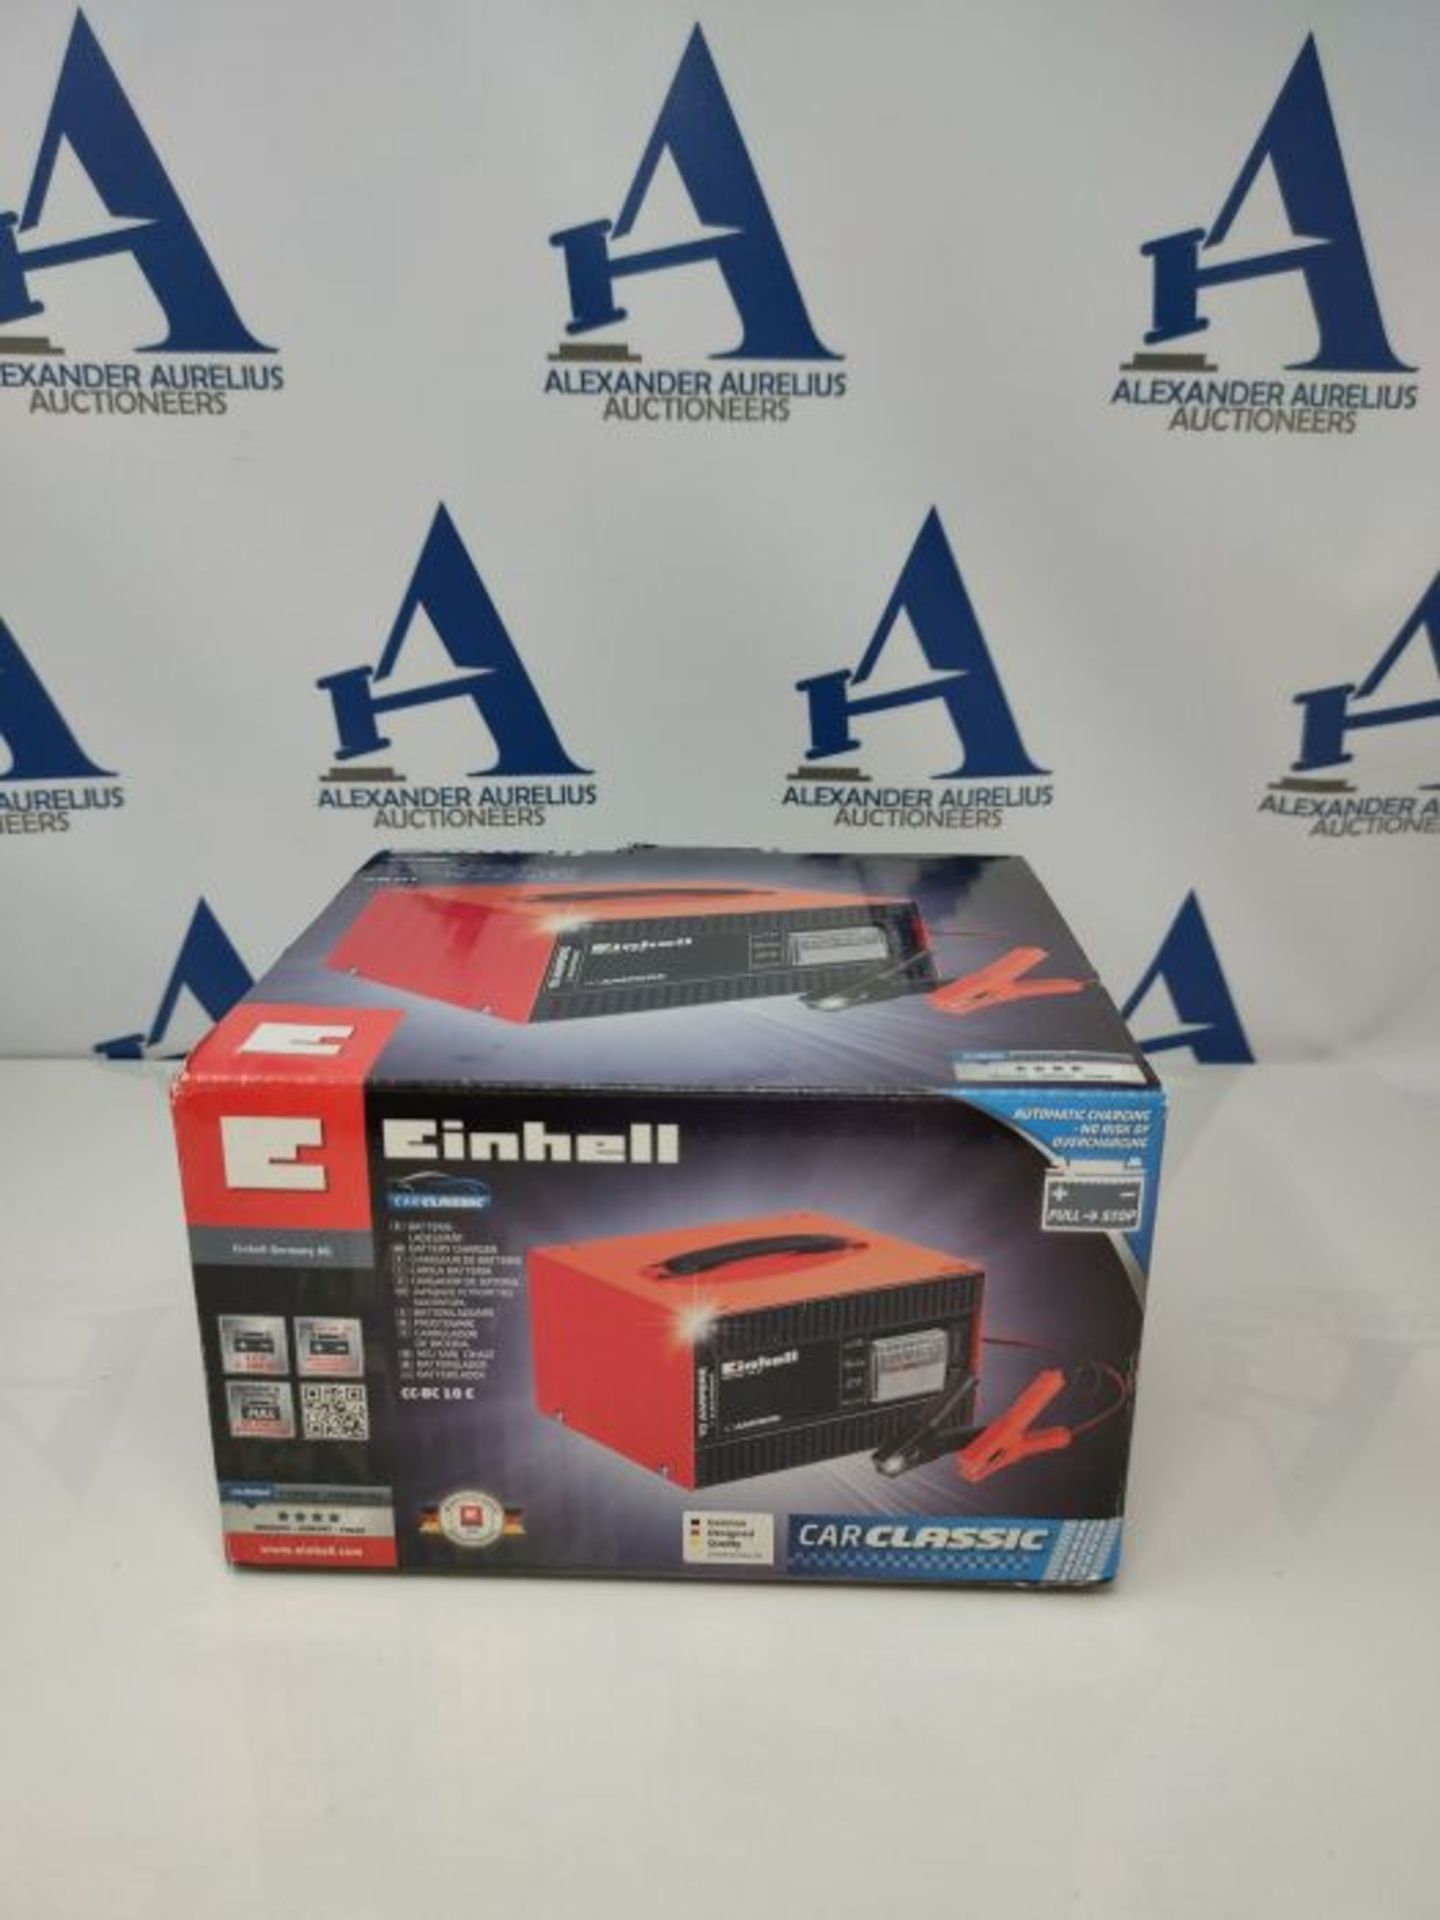 Einhell Battery Charger CC-BC 10 E (for Batteries from 5 to 200 Ah, 12 V Charging V - Image 2 of 3